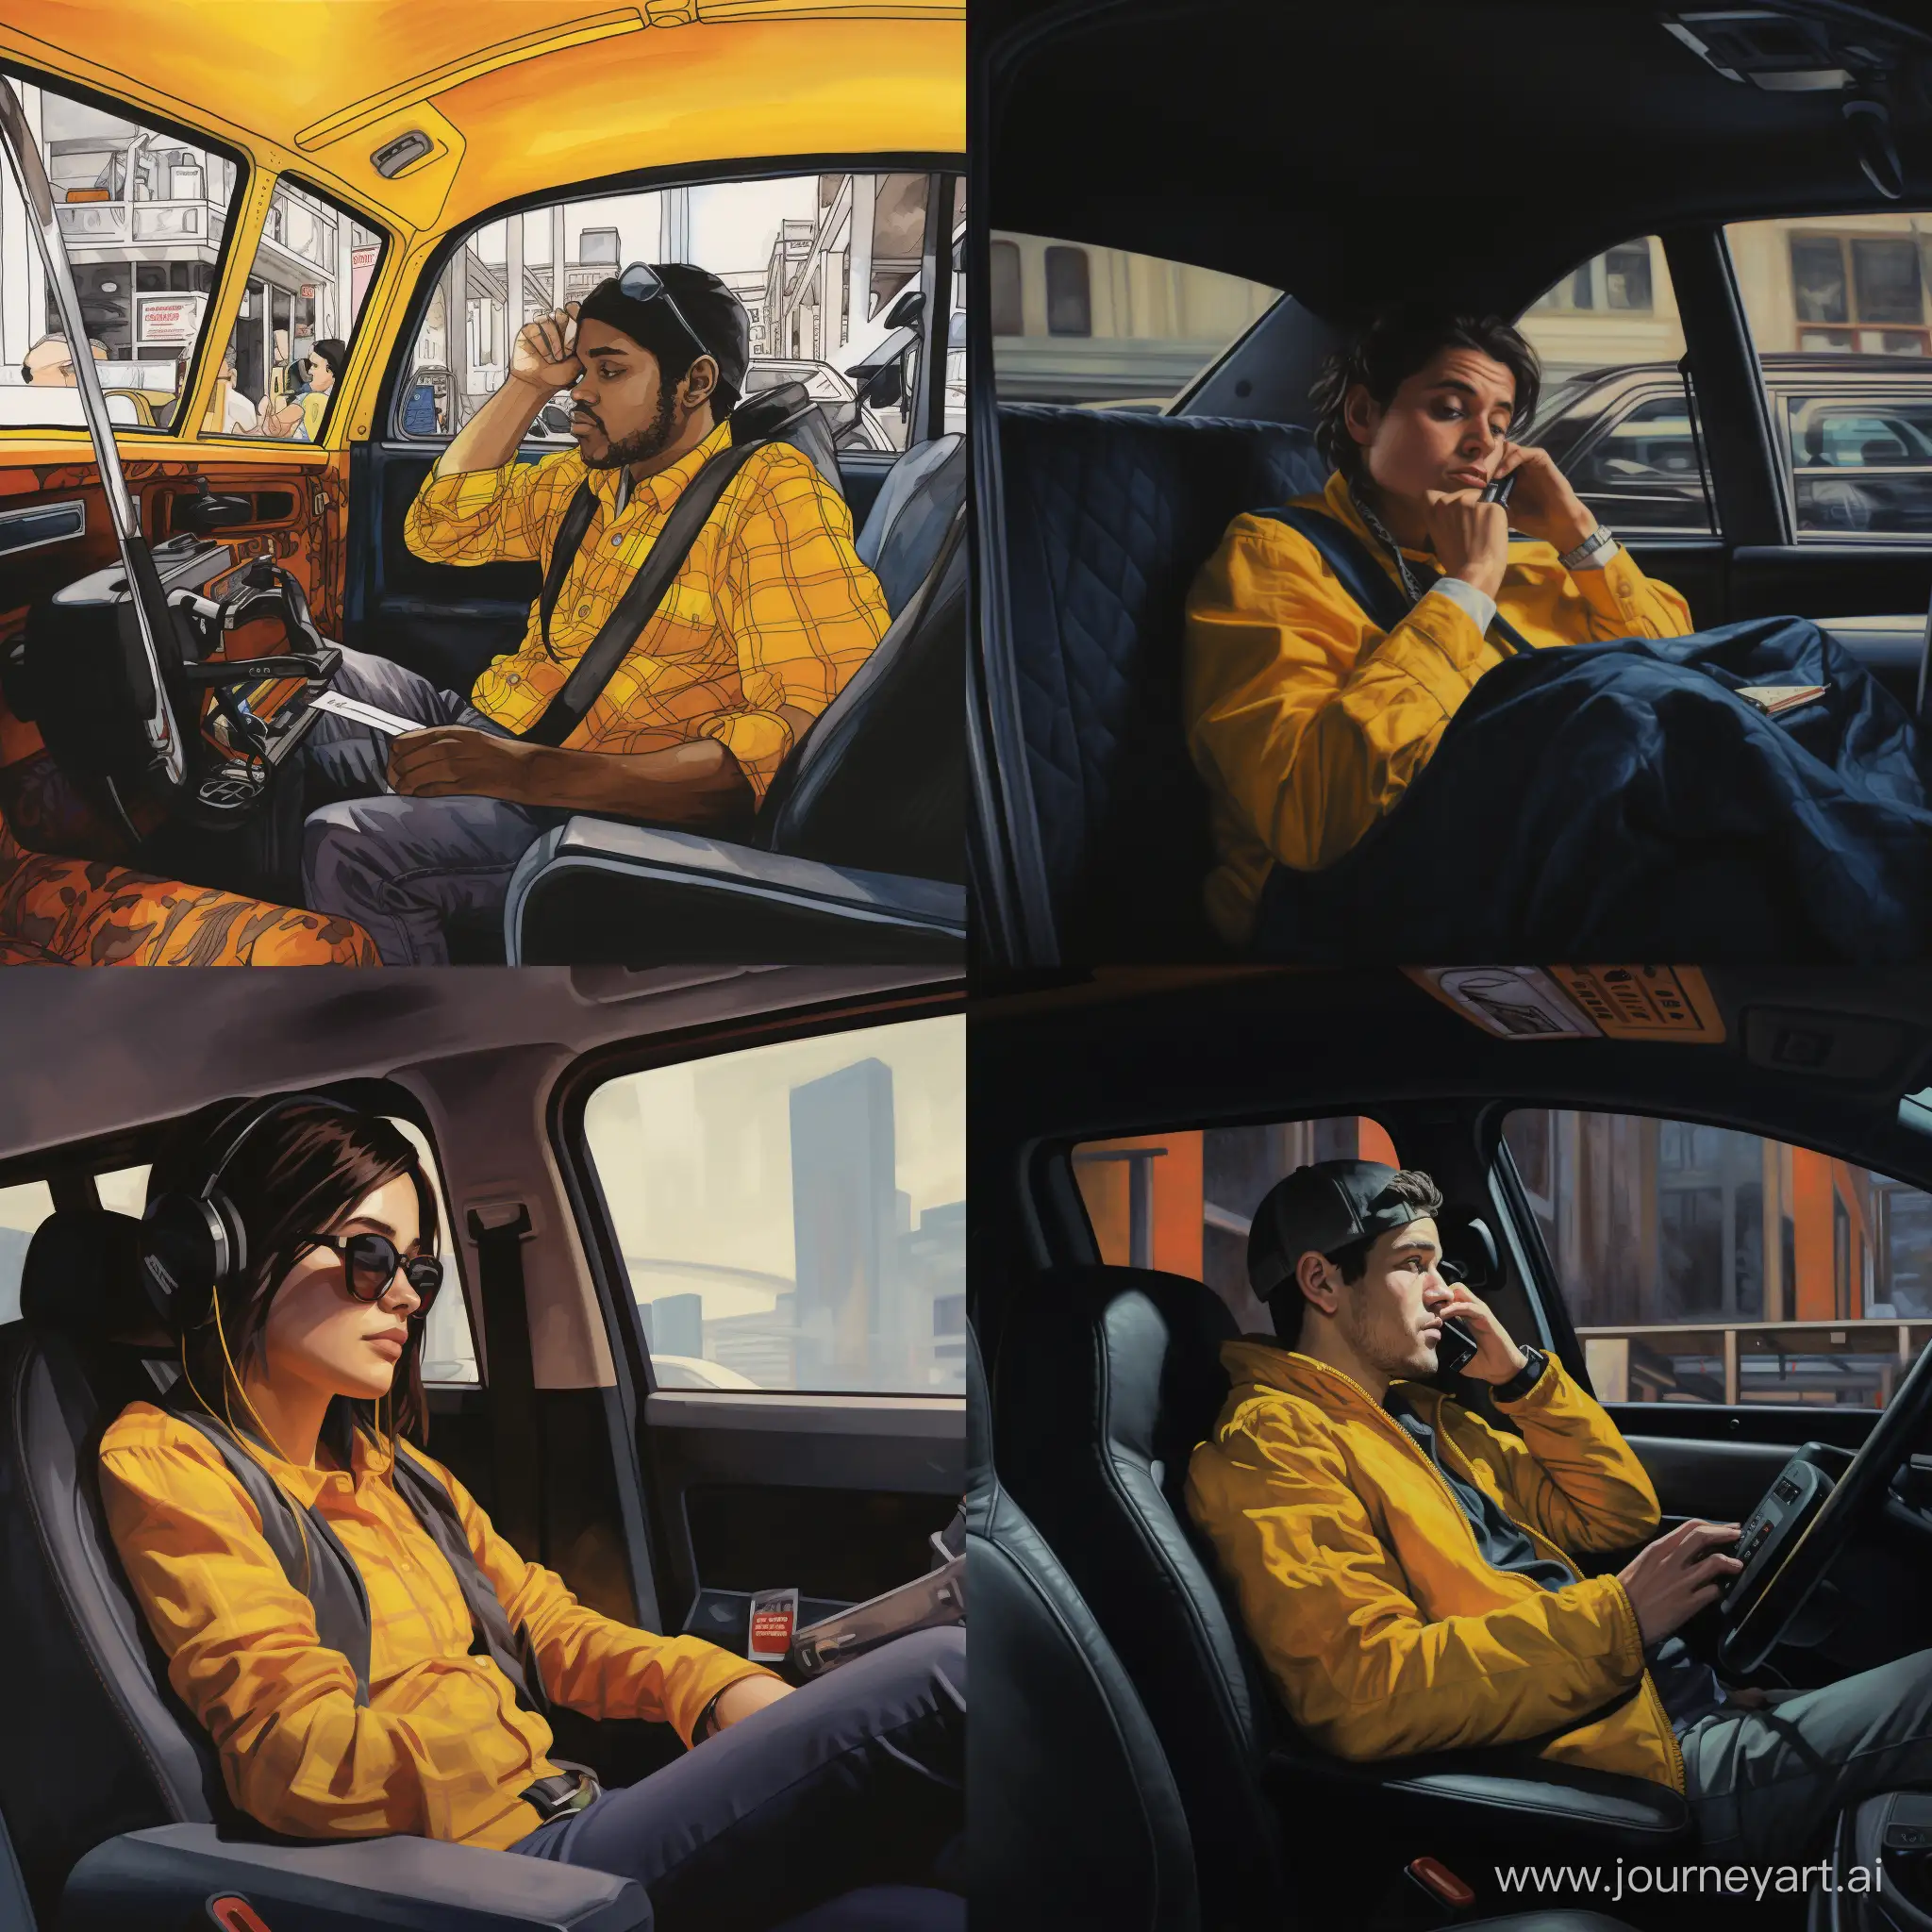 Urban-Commute-Passenger-on-Phone-in-Taxi-Cab